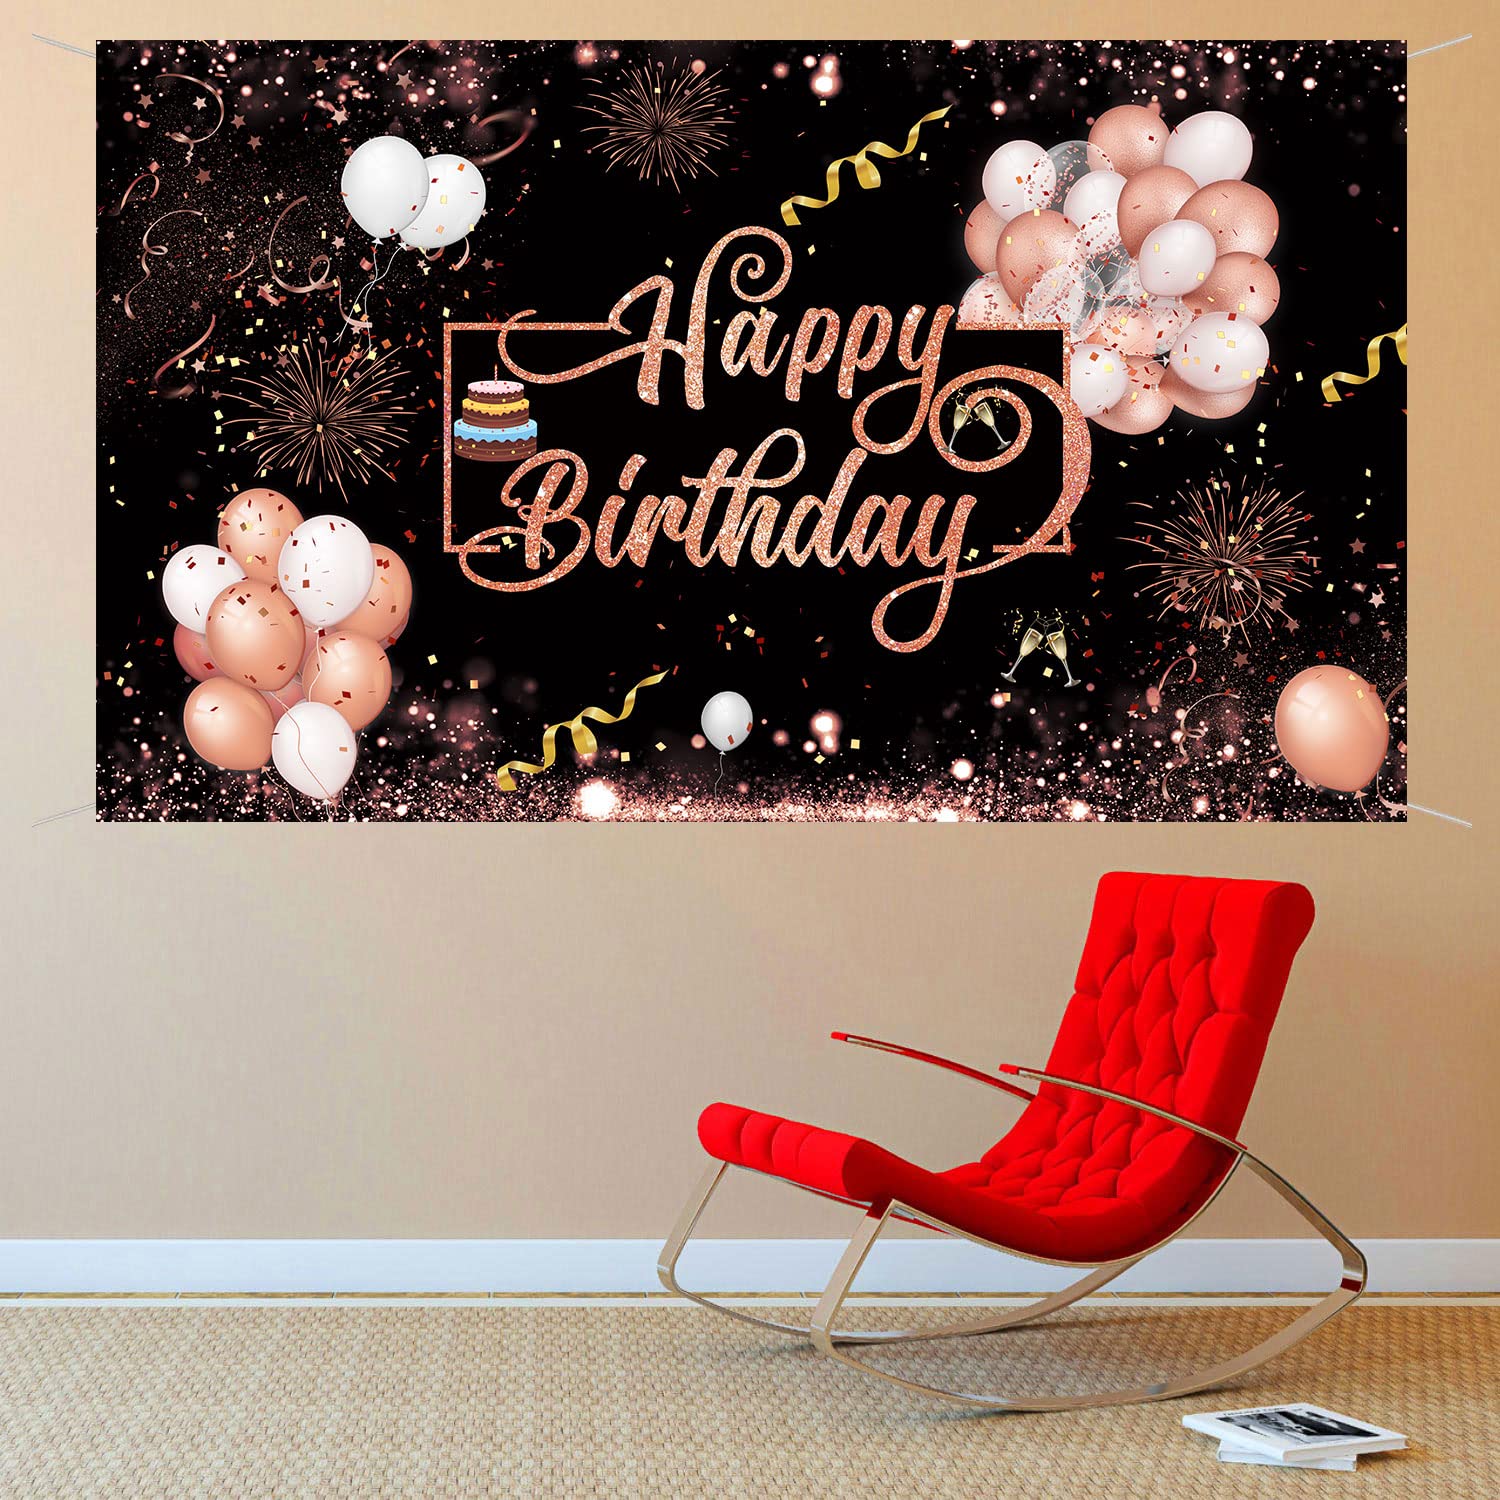 thinkstar Rose Gold Happy Birthday Theme Fabric Sign Poster Banner Backdrop With Firework,Star,Balloons,Cakes Pattern For Brithday Phot…